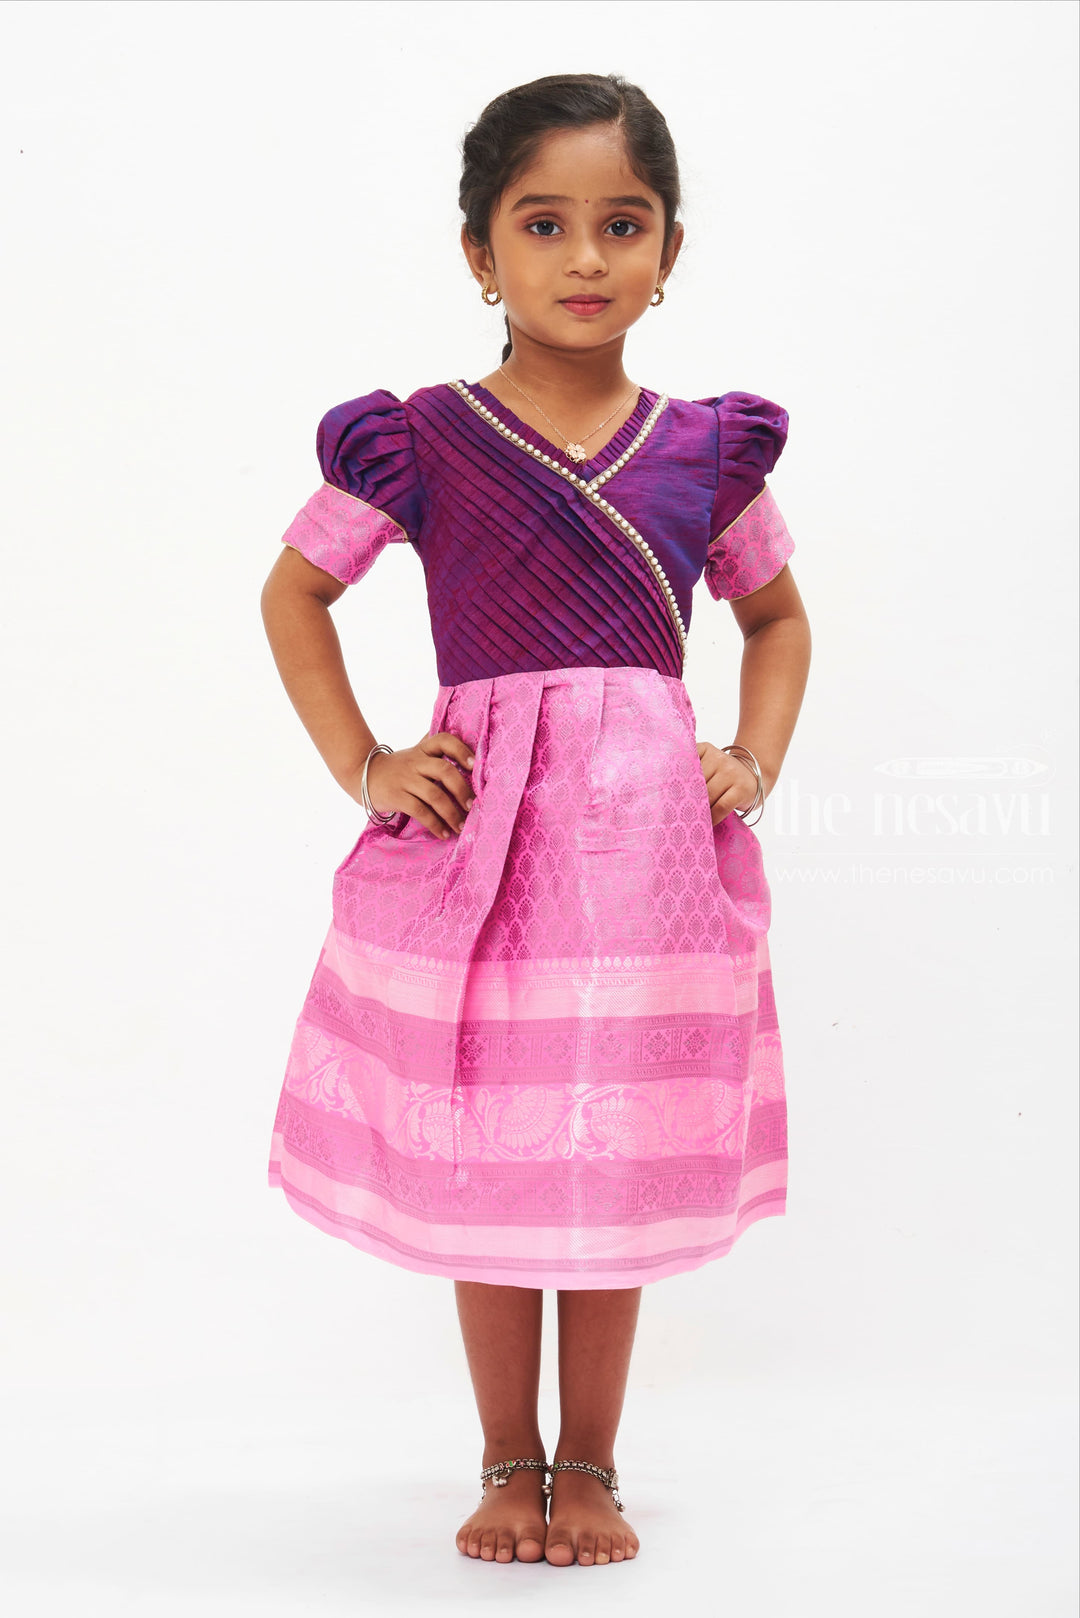 The Nesavu Silk Frock Majestic Purple & Pink Dress: Traditional Indian Wear with Modern Flair for Girls Nesavu 14 (6M) / Purple / Style 1 SF727A-14 Girls Traditional Dress | Elegant Indian Silk Frock for Kids | The Nesavu